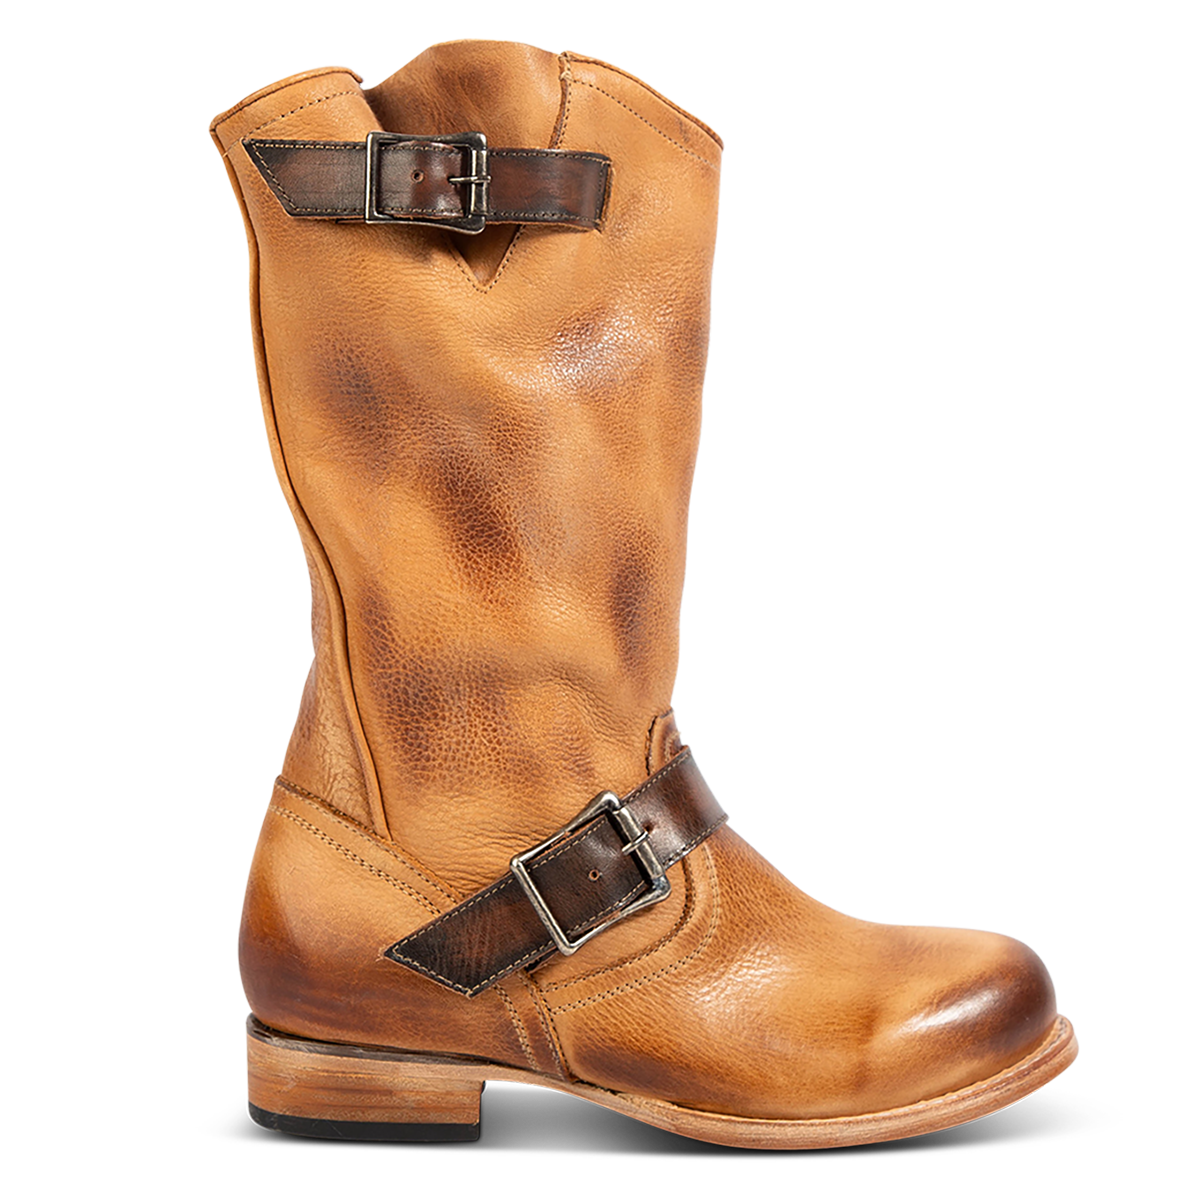 FREEBIRD women's Rip wheat leather boot with functioning buck straps, a working brass inside zipper and a low block heel